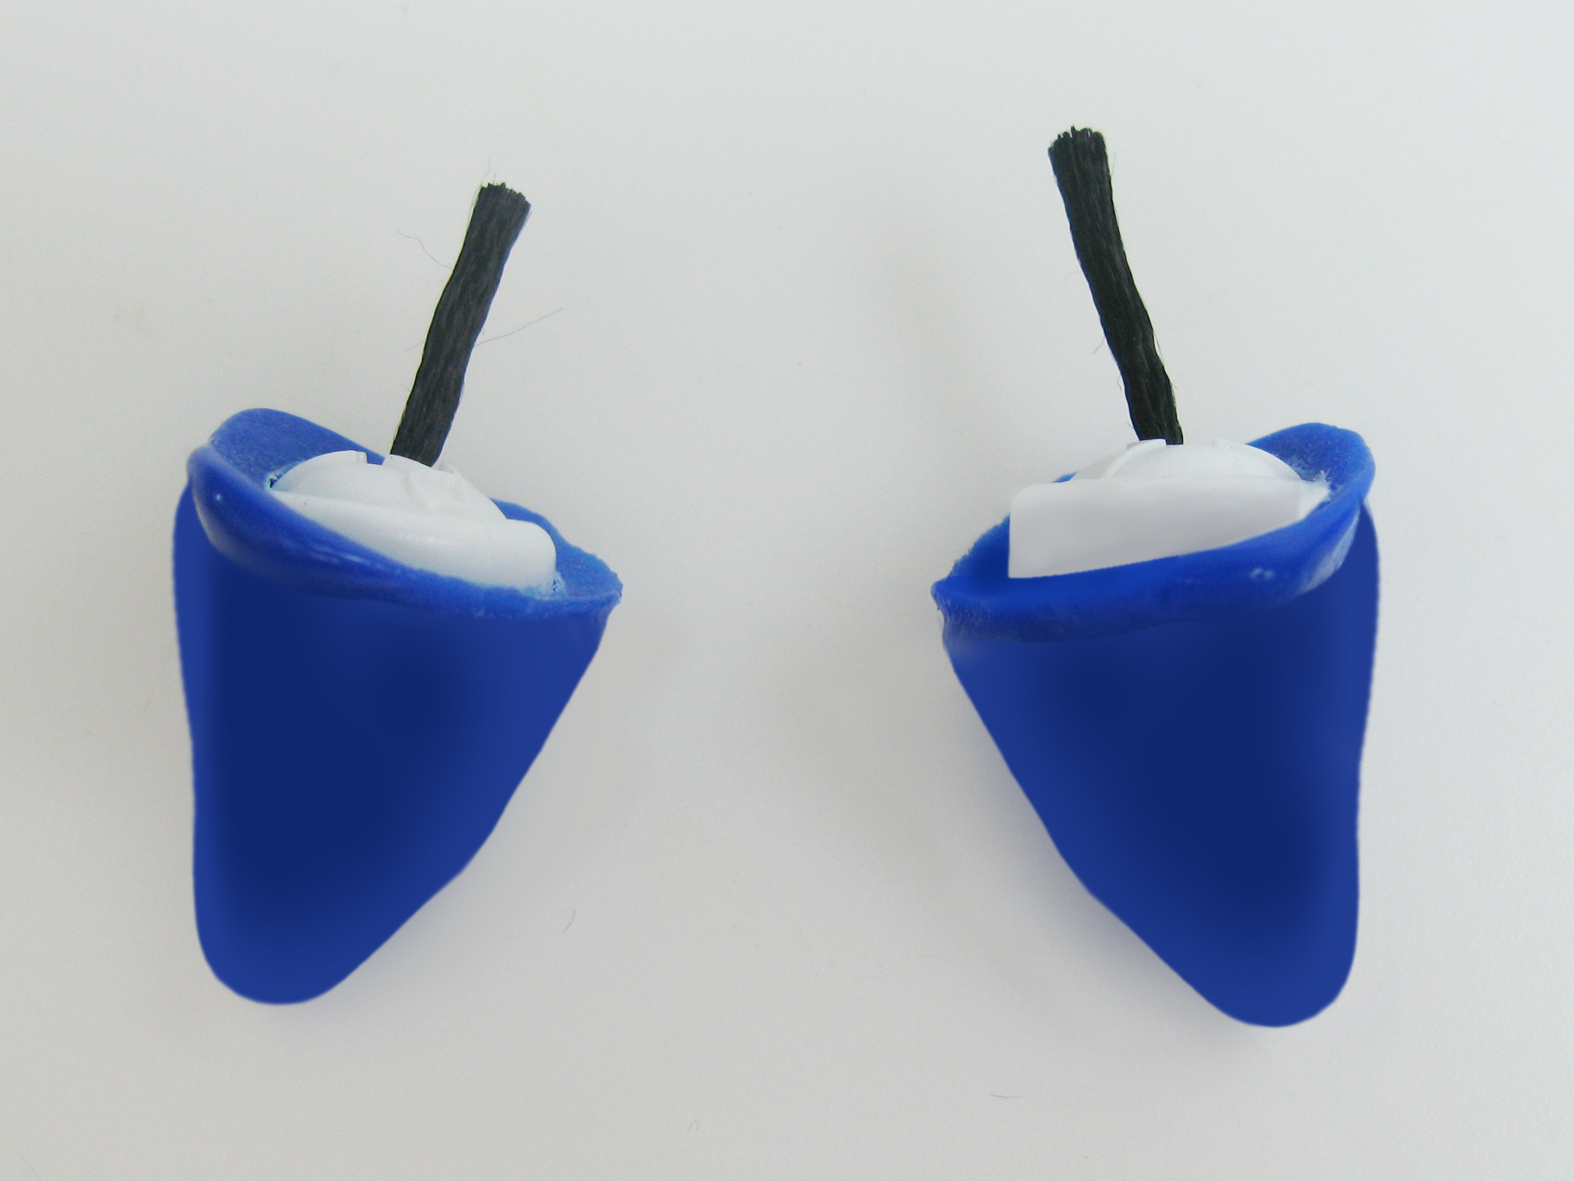 ZenPlugs After Molding.  Super comfortable swimming ear plugs, ear plugs for surfing, sleeping, snoring.